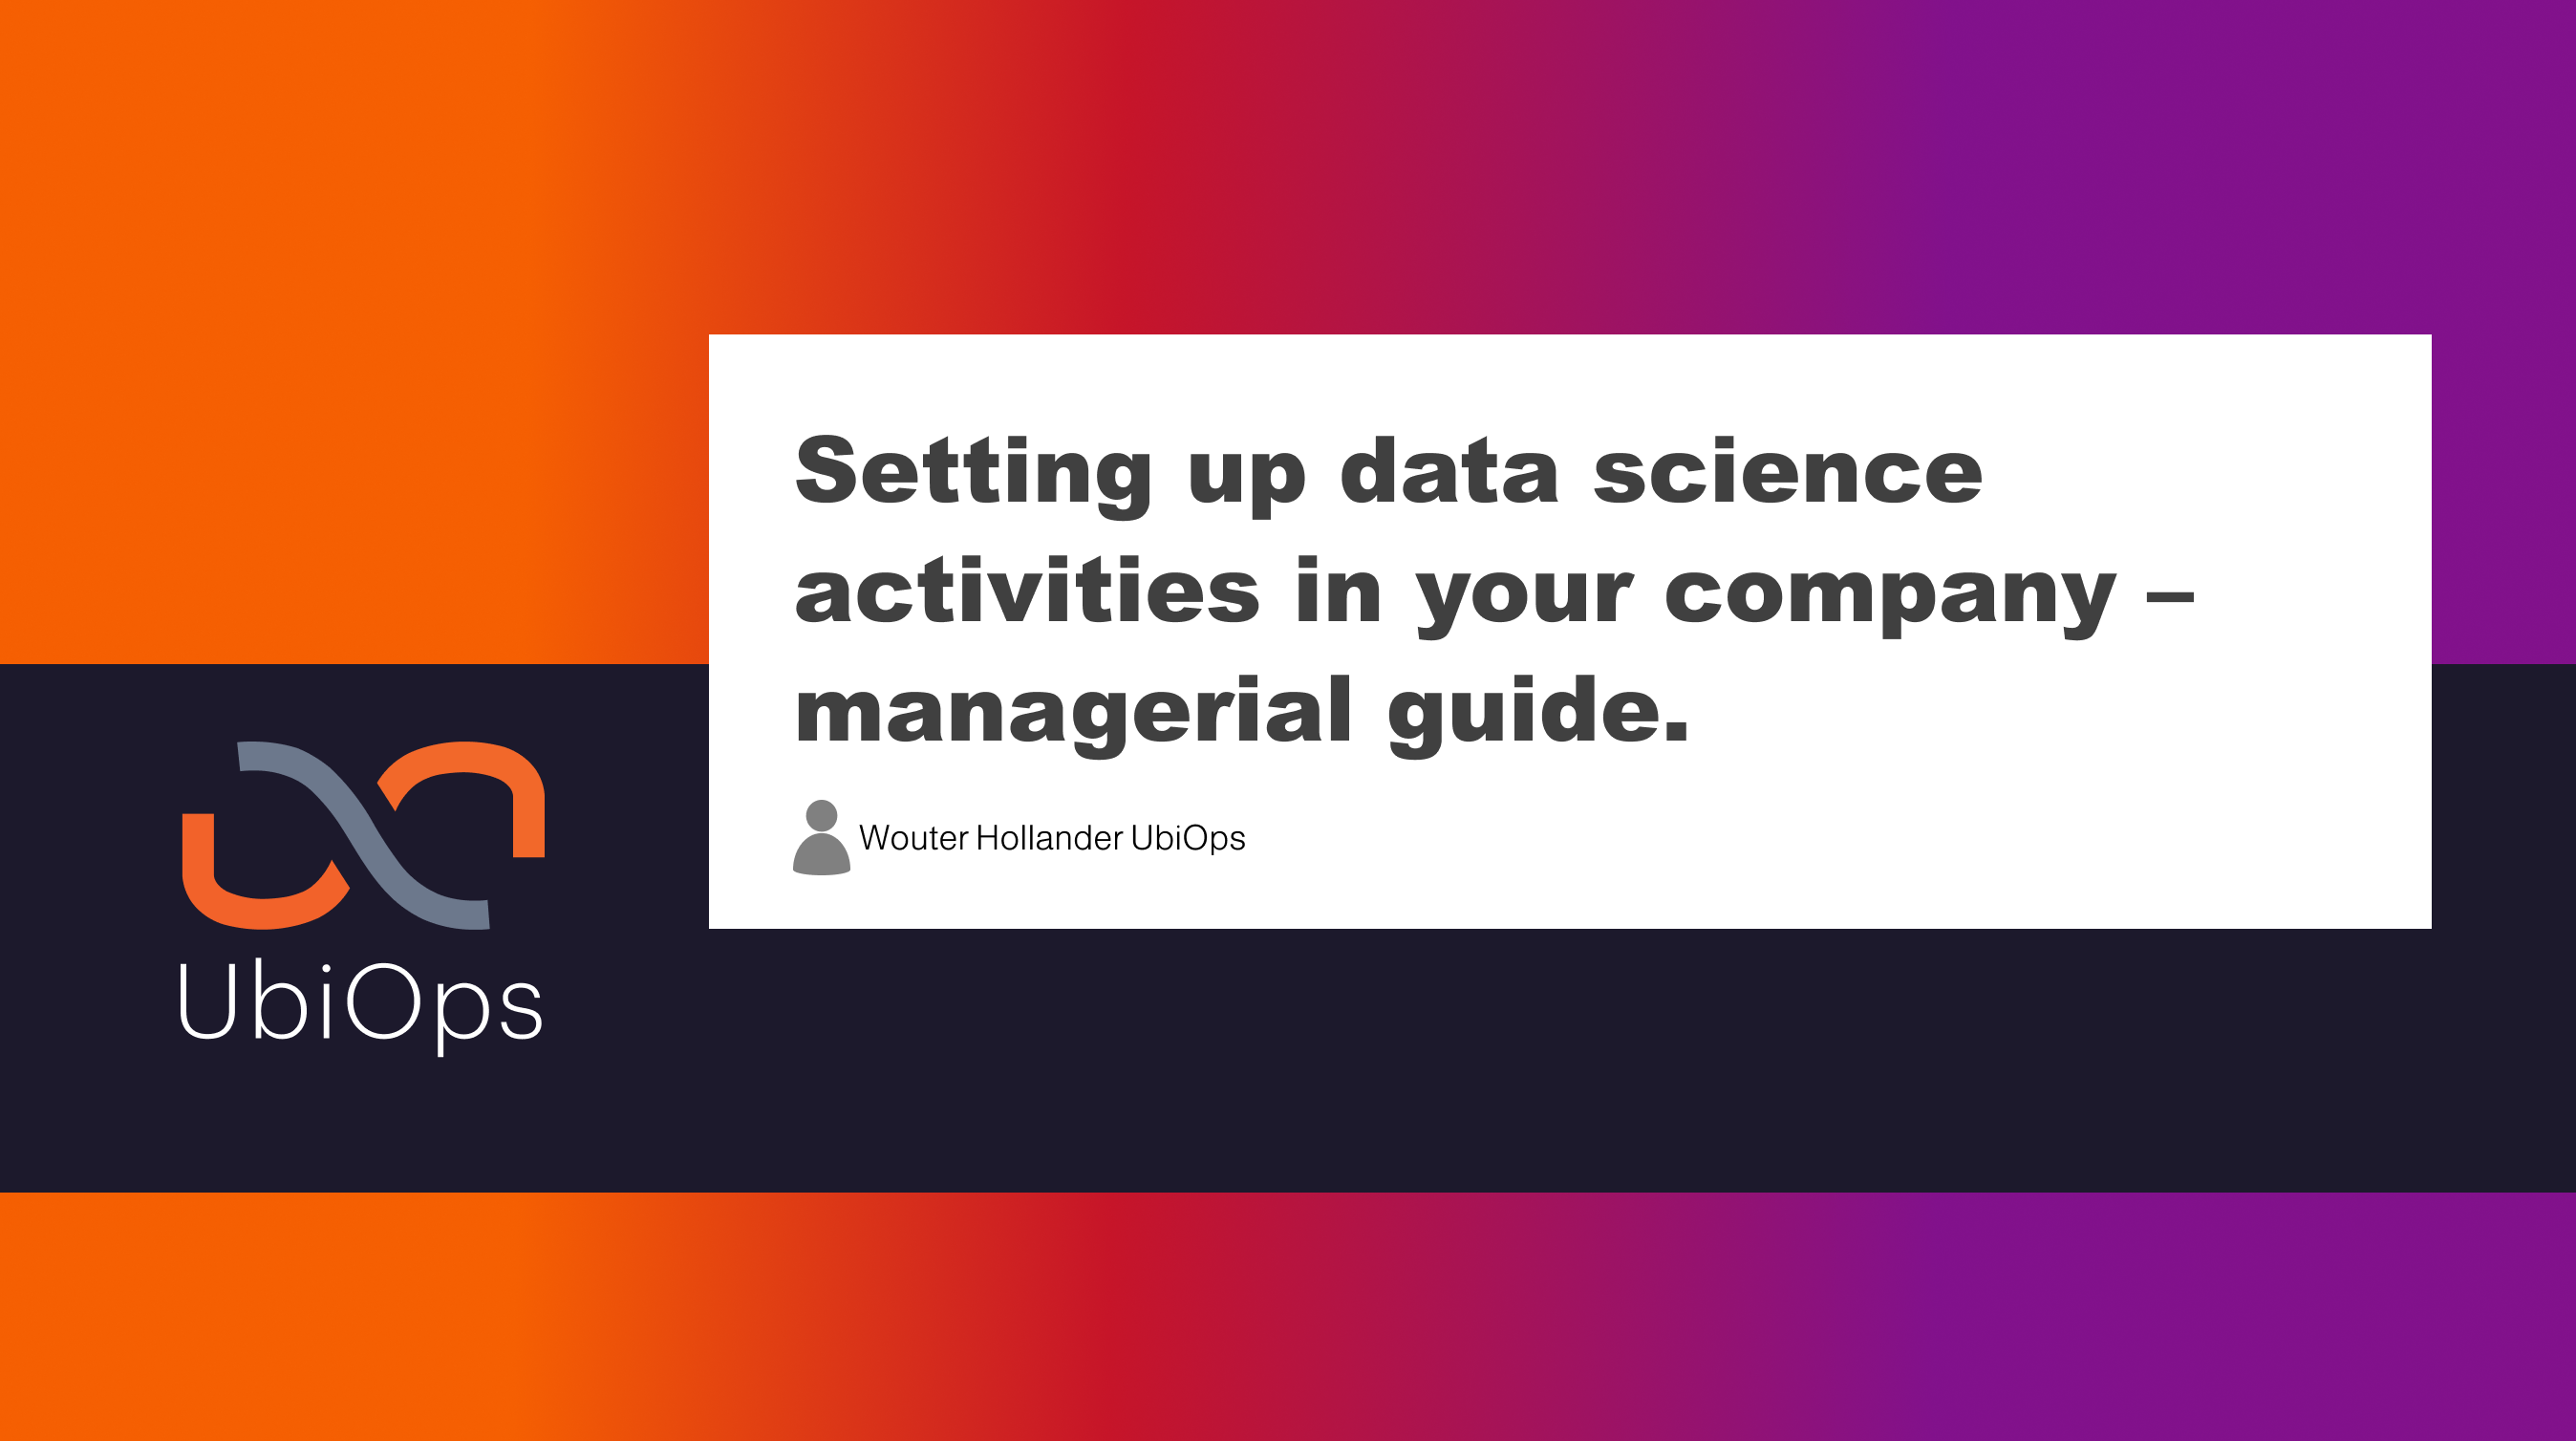 Setting up data science activities in your company.